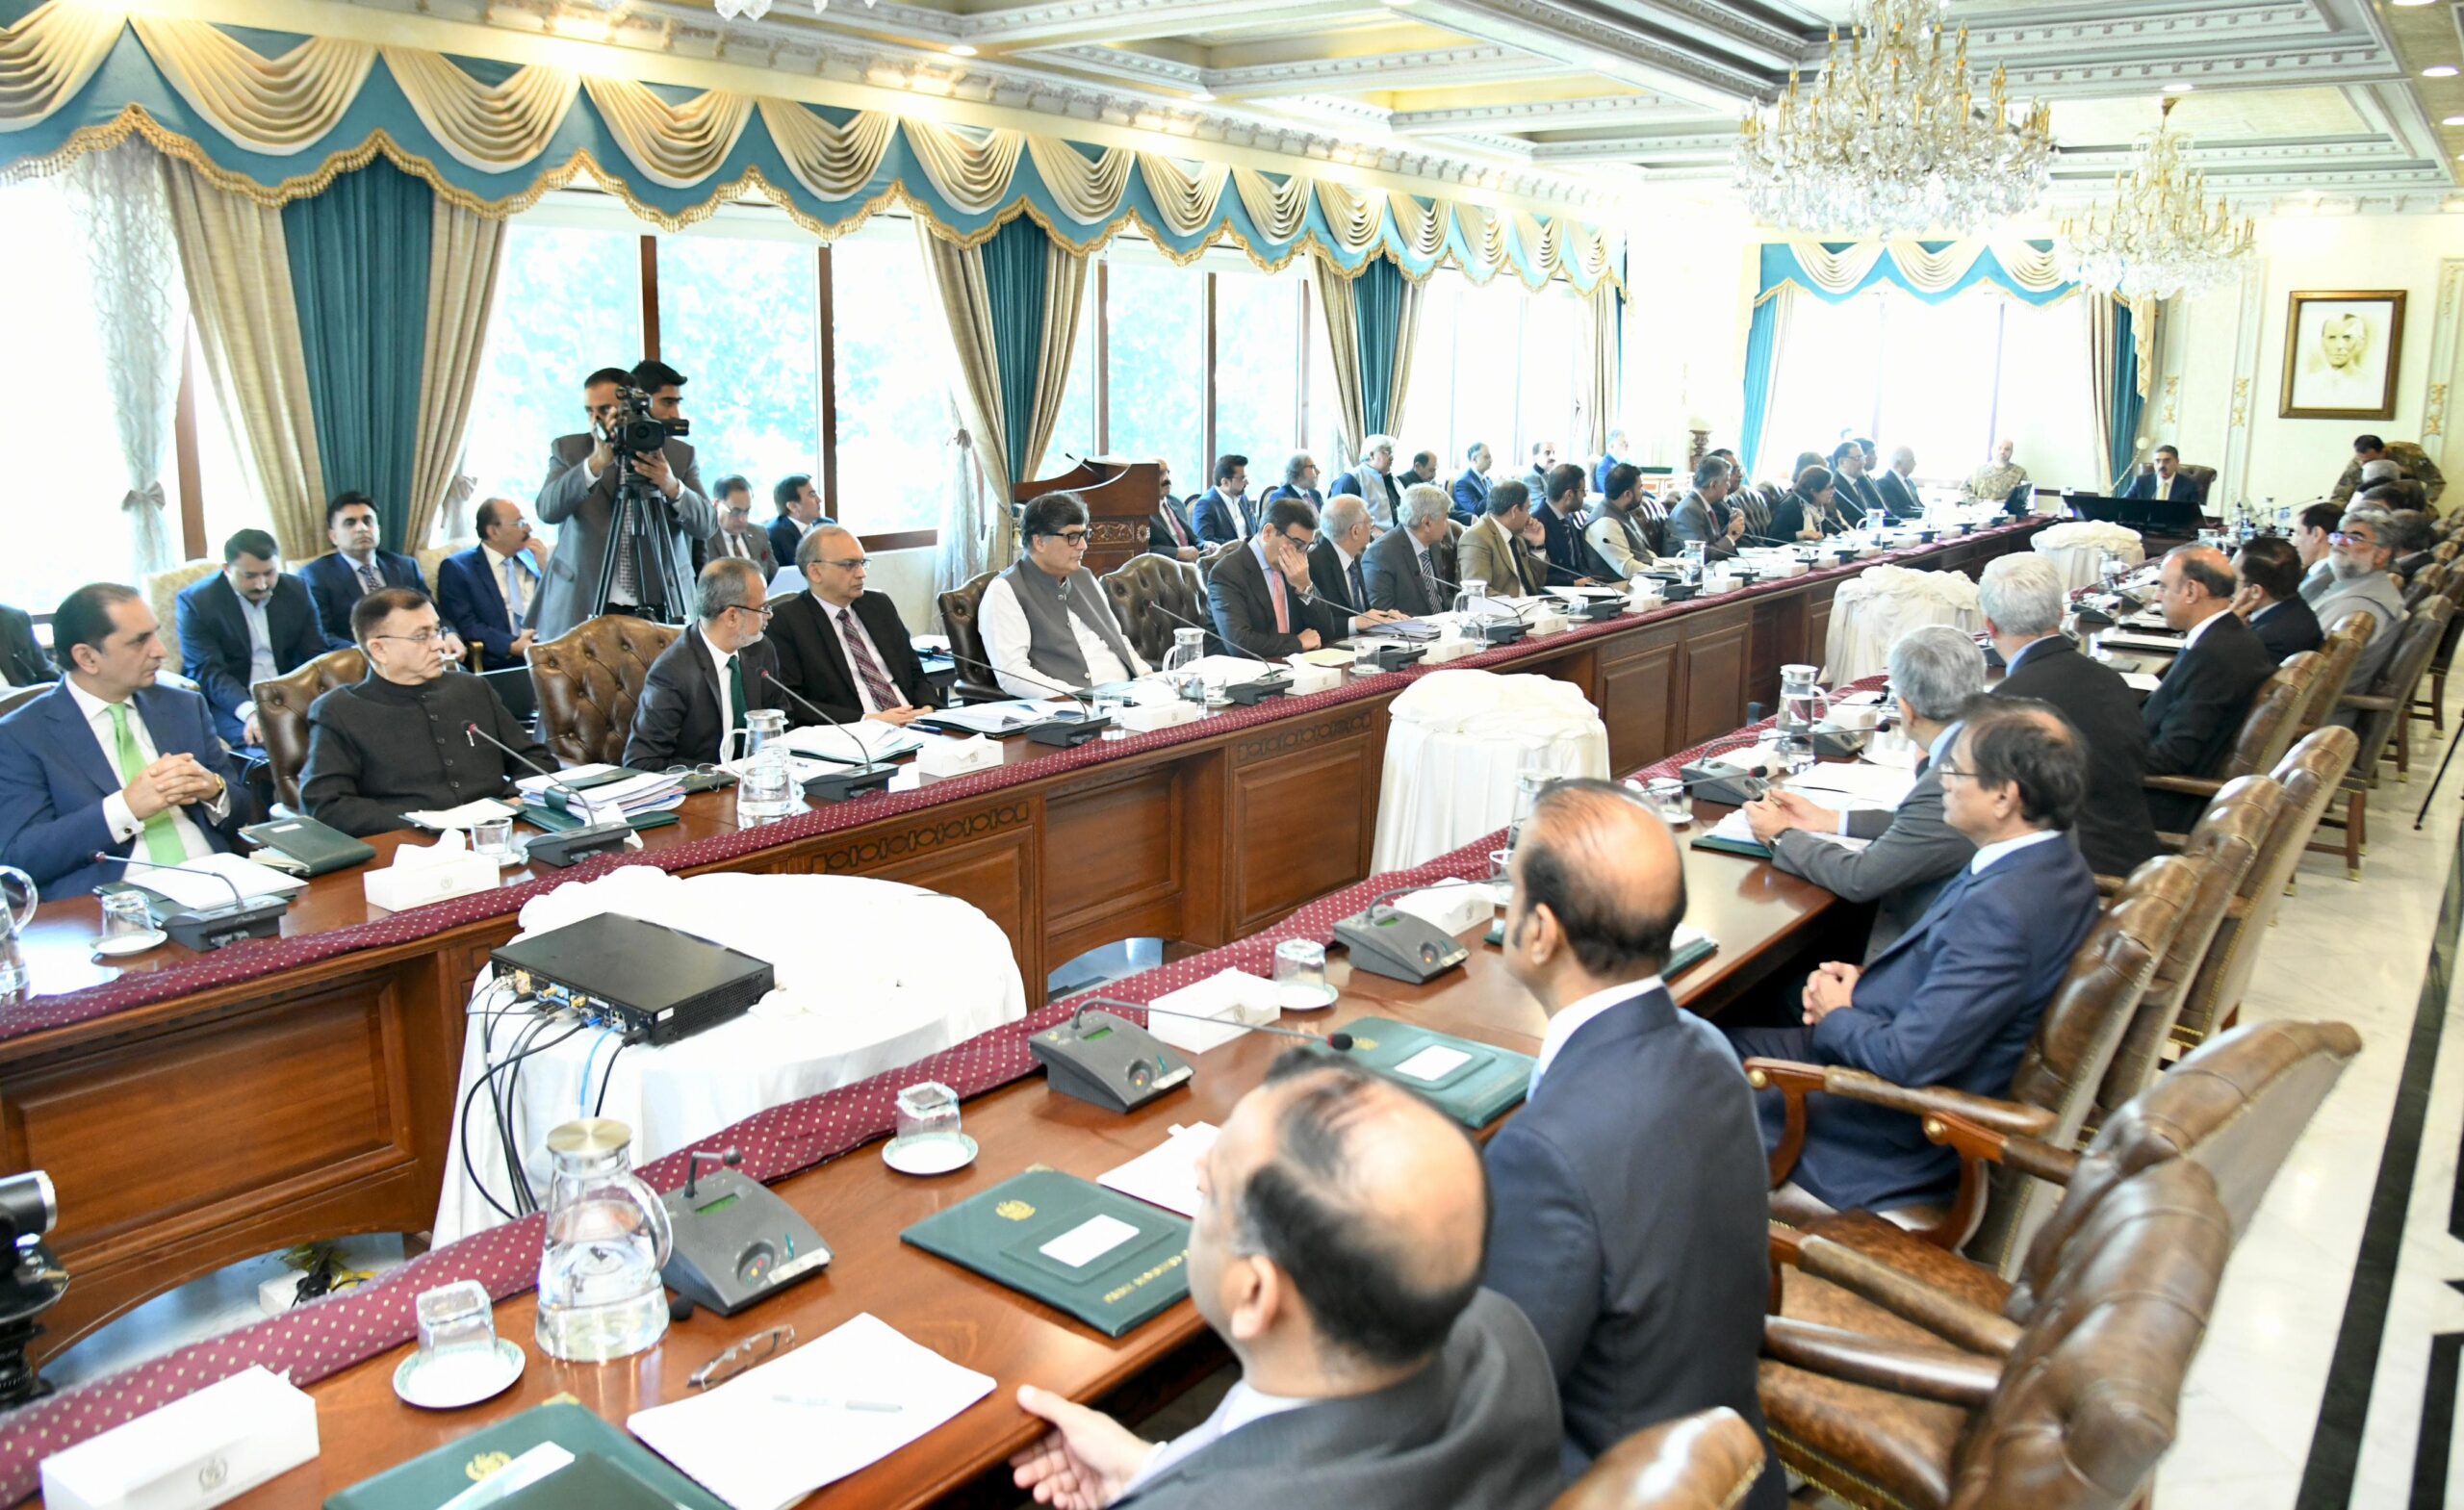 7th Apex Committee Meeting chaired by the Caretaker Prime Minister Anwaar-ul-Haq Kakar.